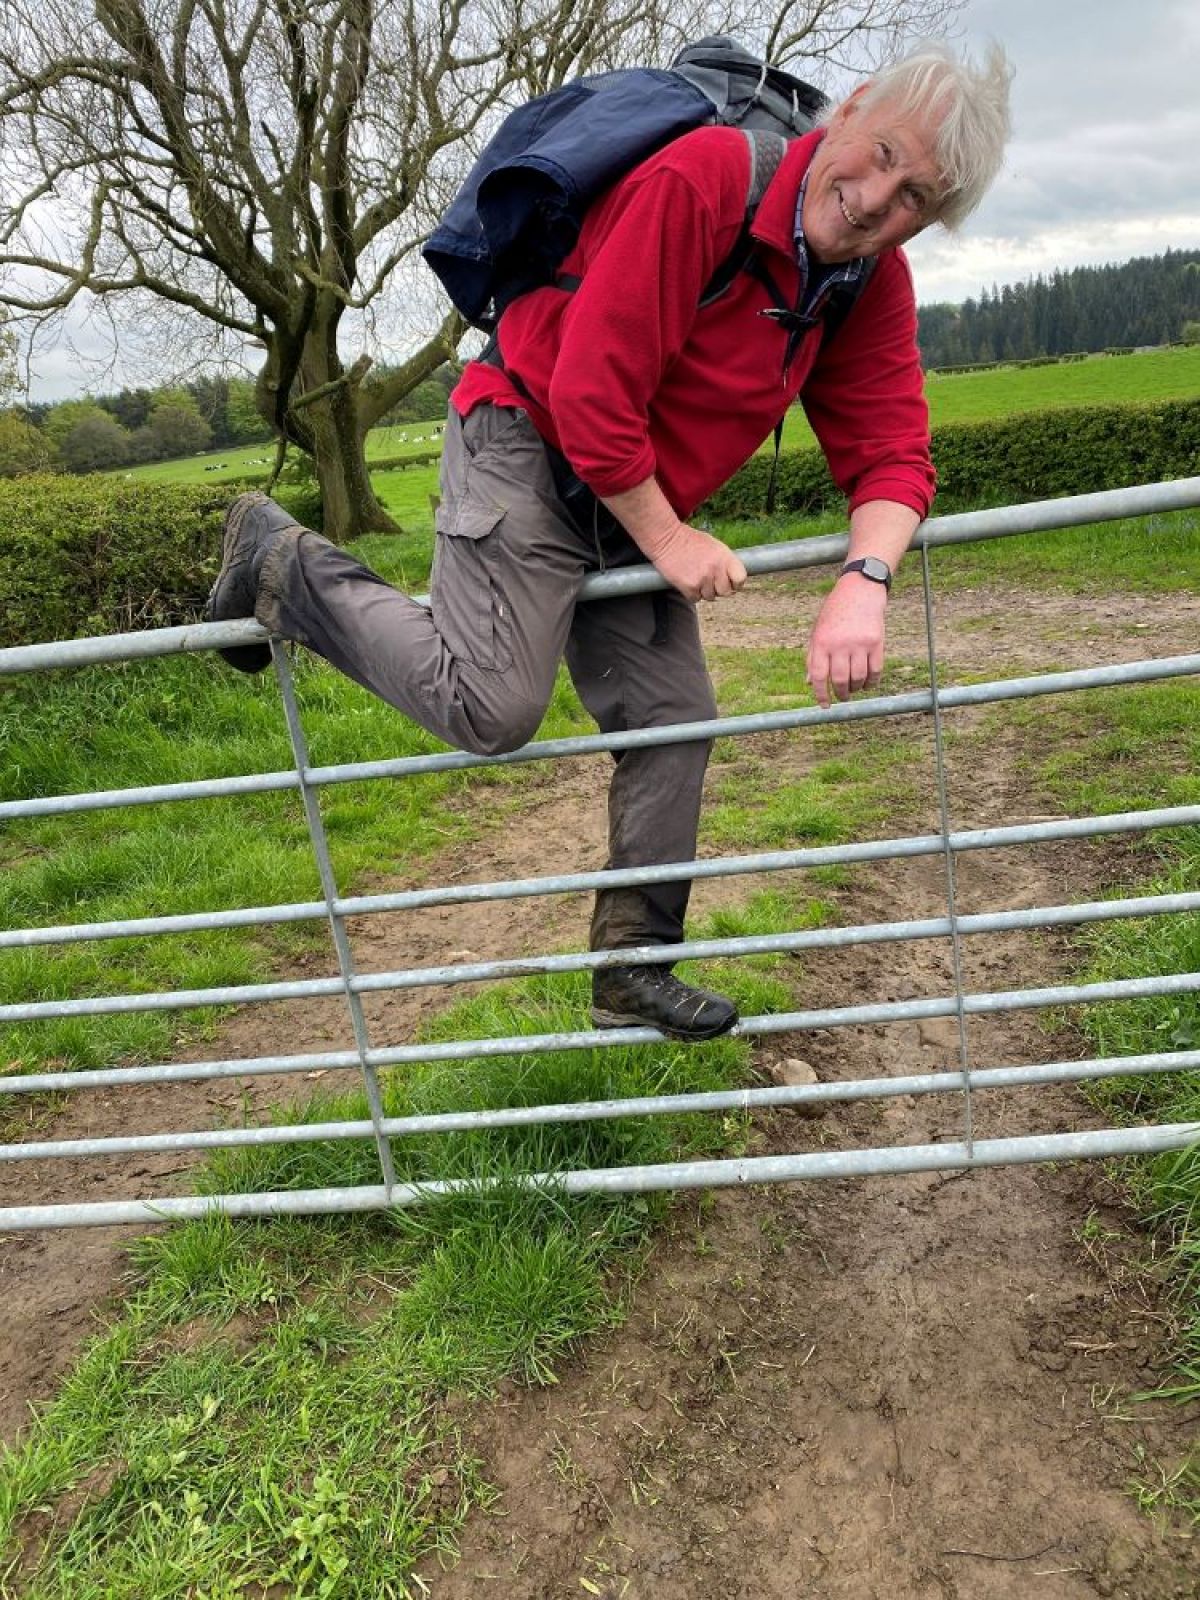 ------Sponsored Walk from Ripon Cathedral to Bradford Cathedral------ Raises £2,100 - Robert climbs a gate